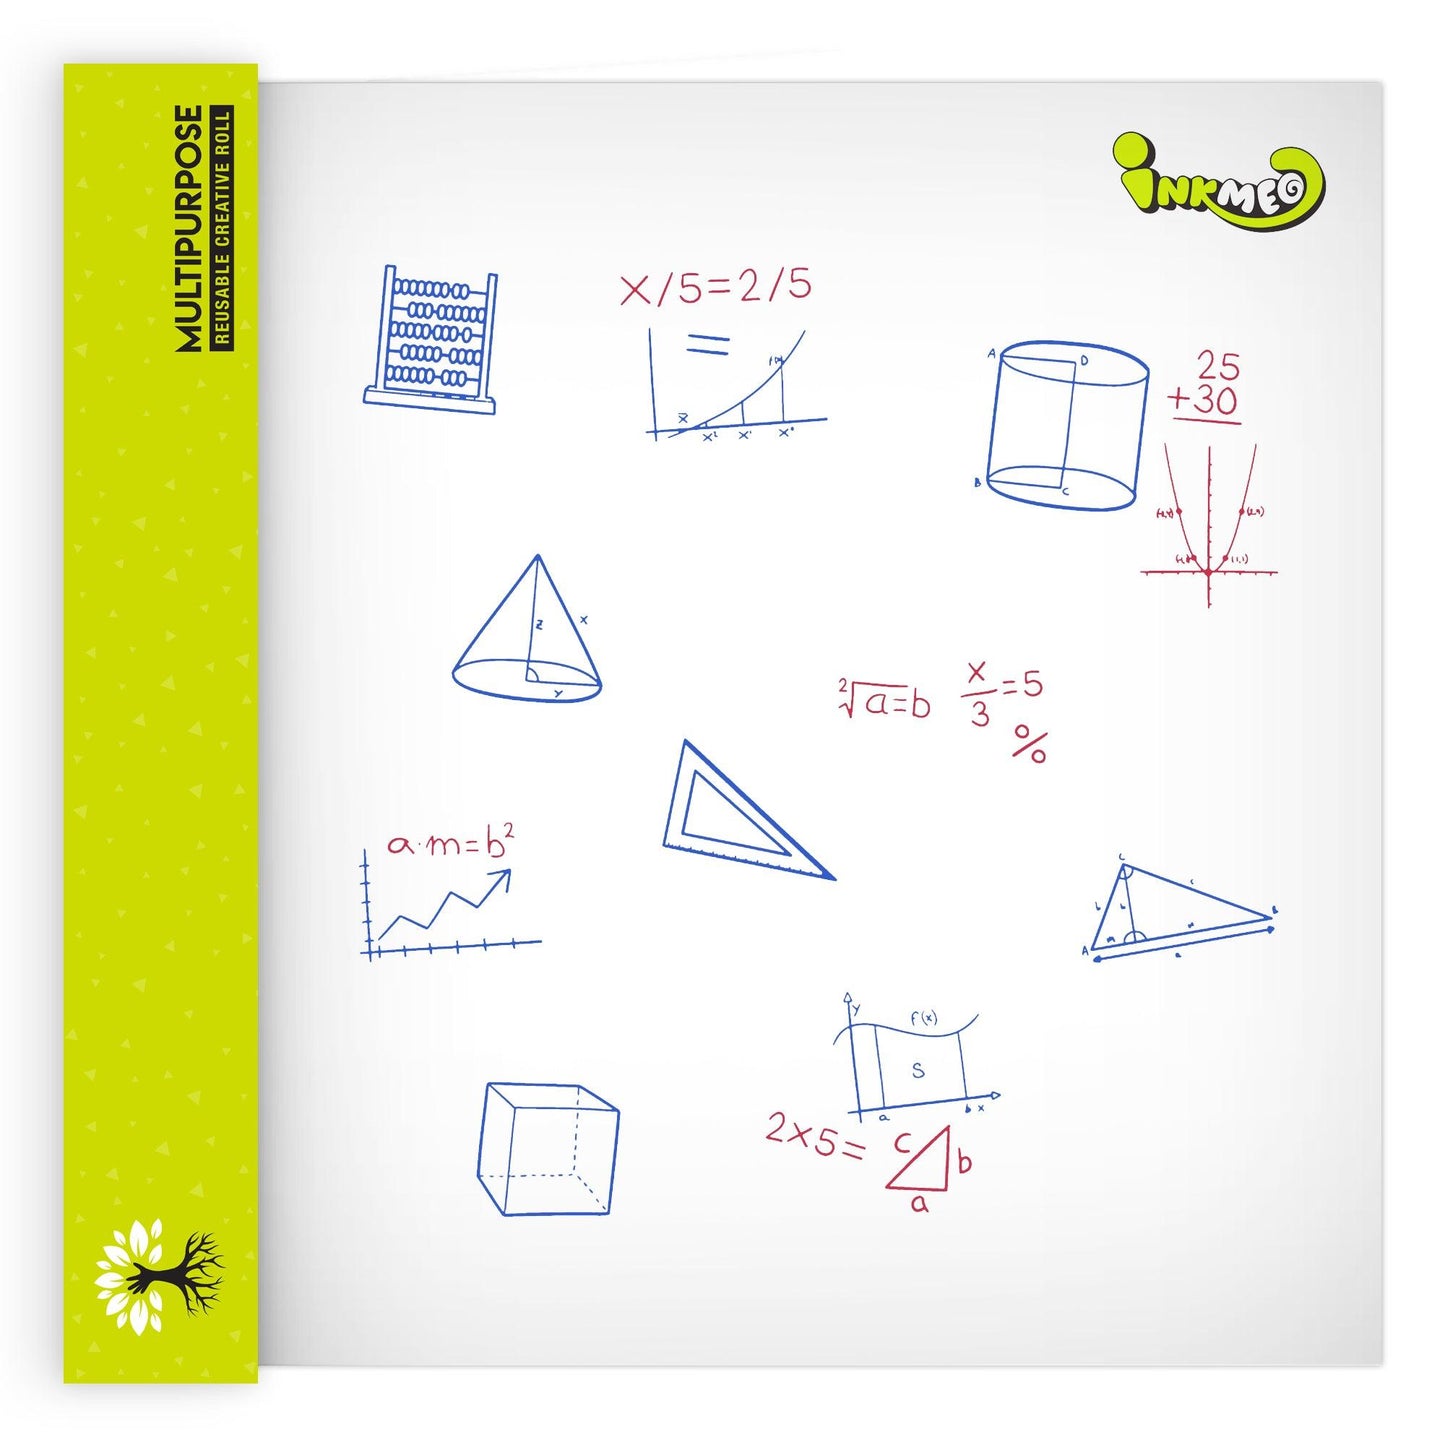 The image depicts a white paper with handwritten points, diagrams, and notes.